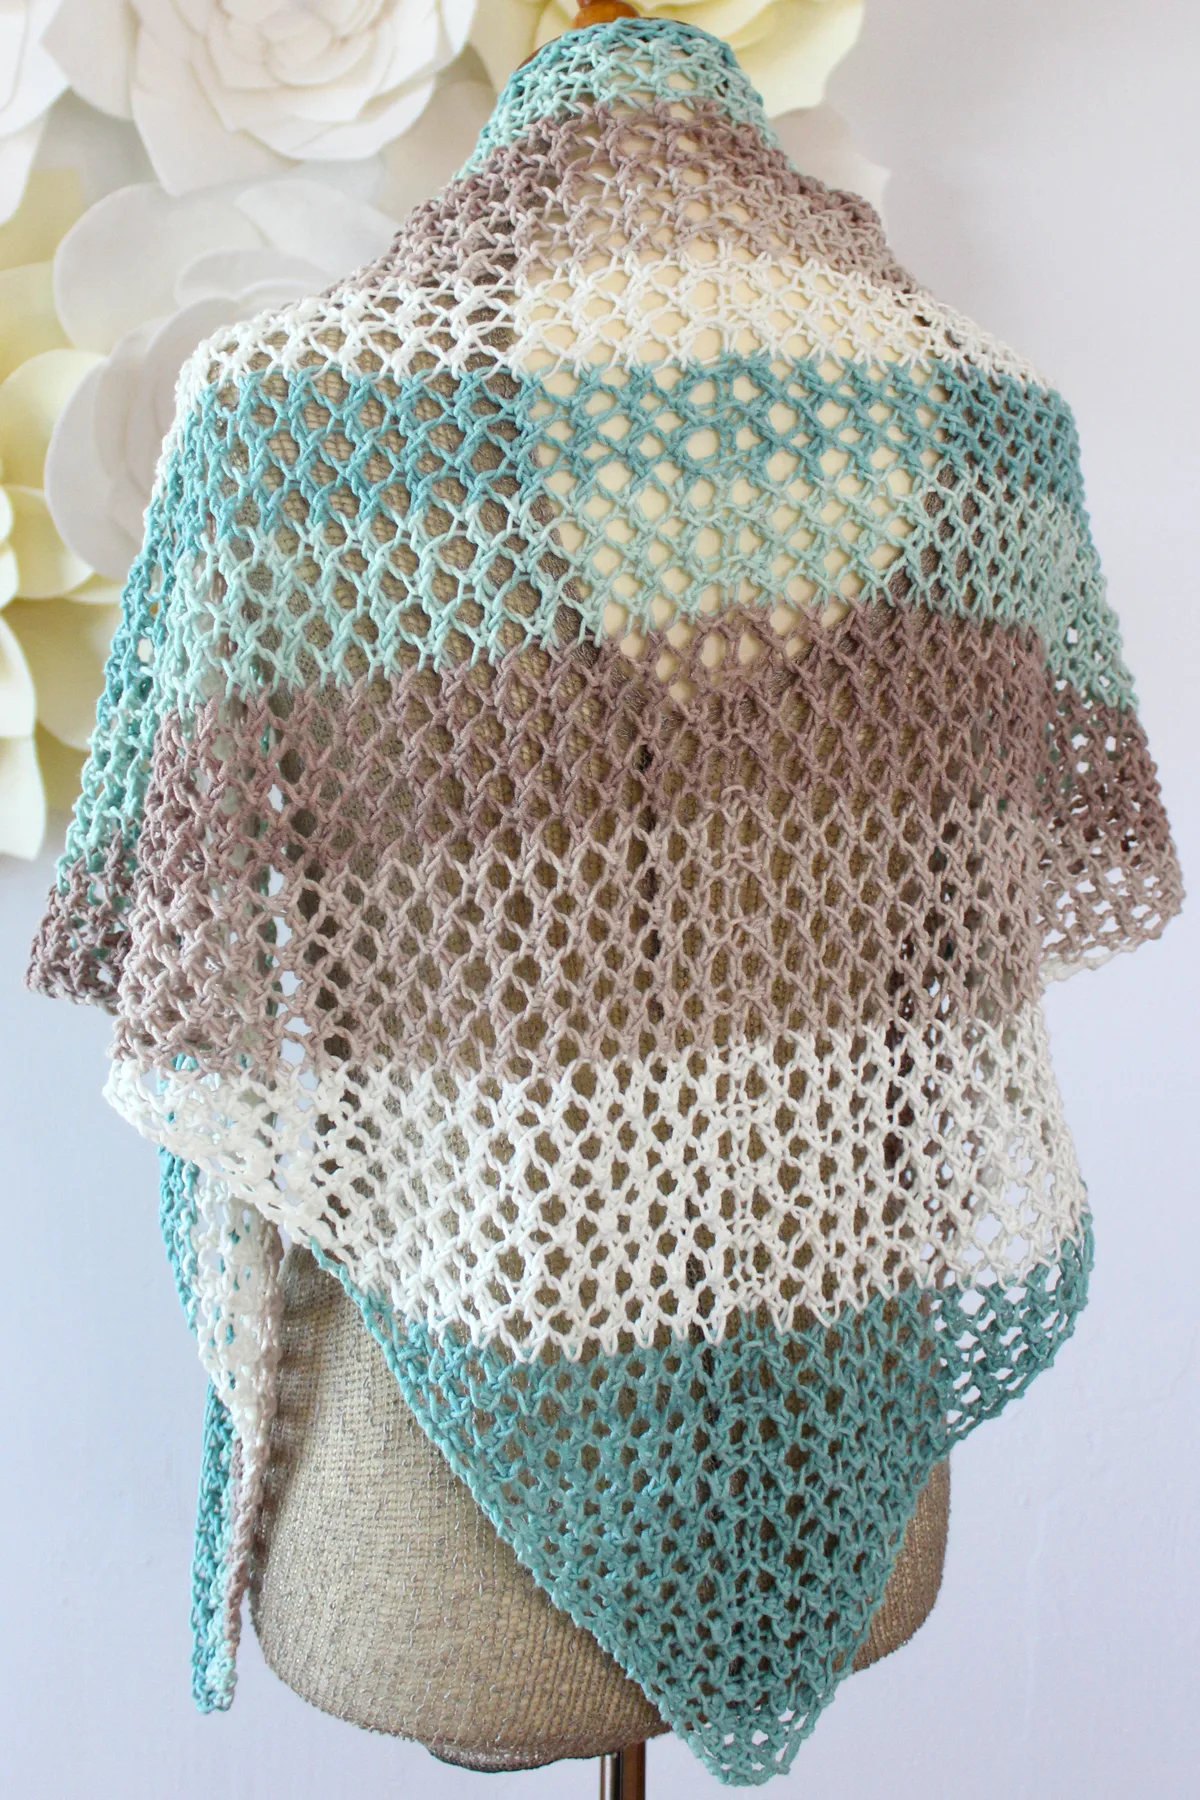 Back view of a triangle shaped knitted mesh shawl in displayed on a mannequin in colors blue, brown, and white.